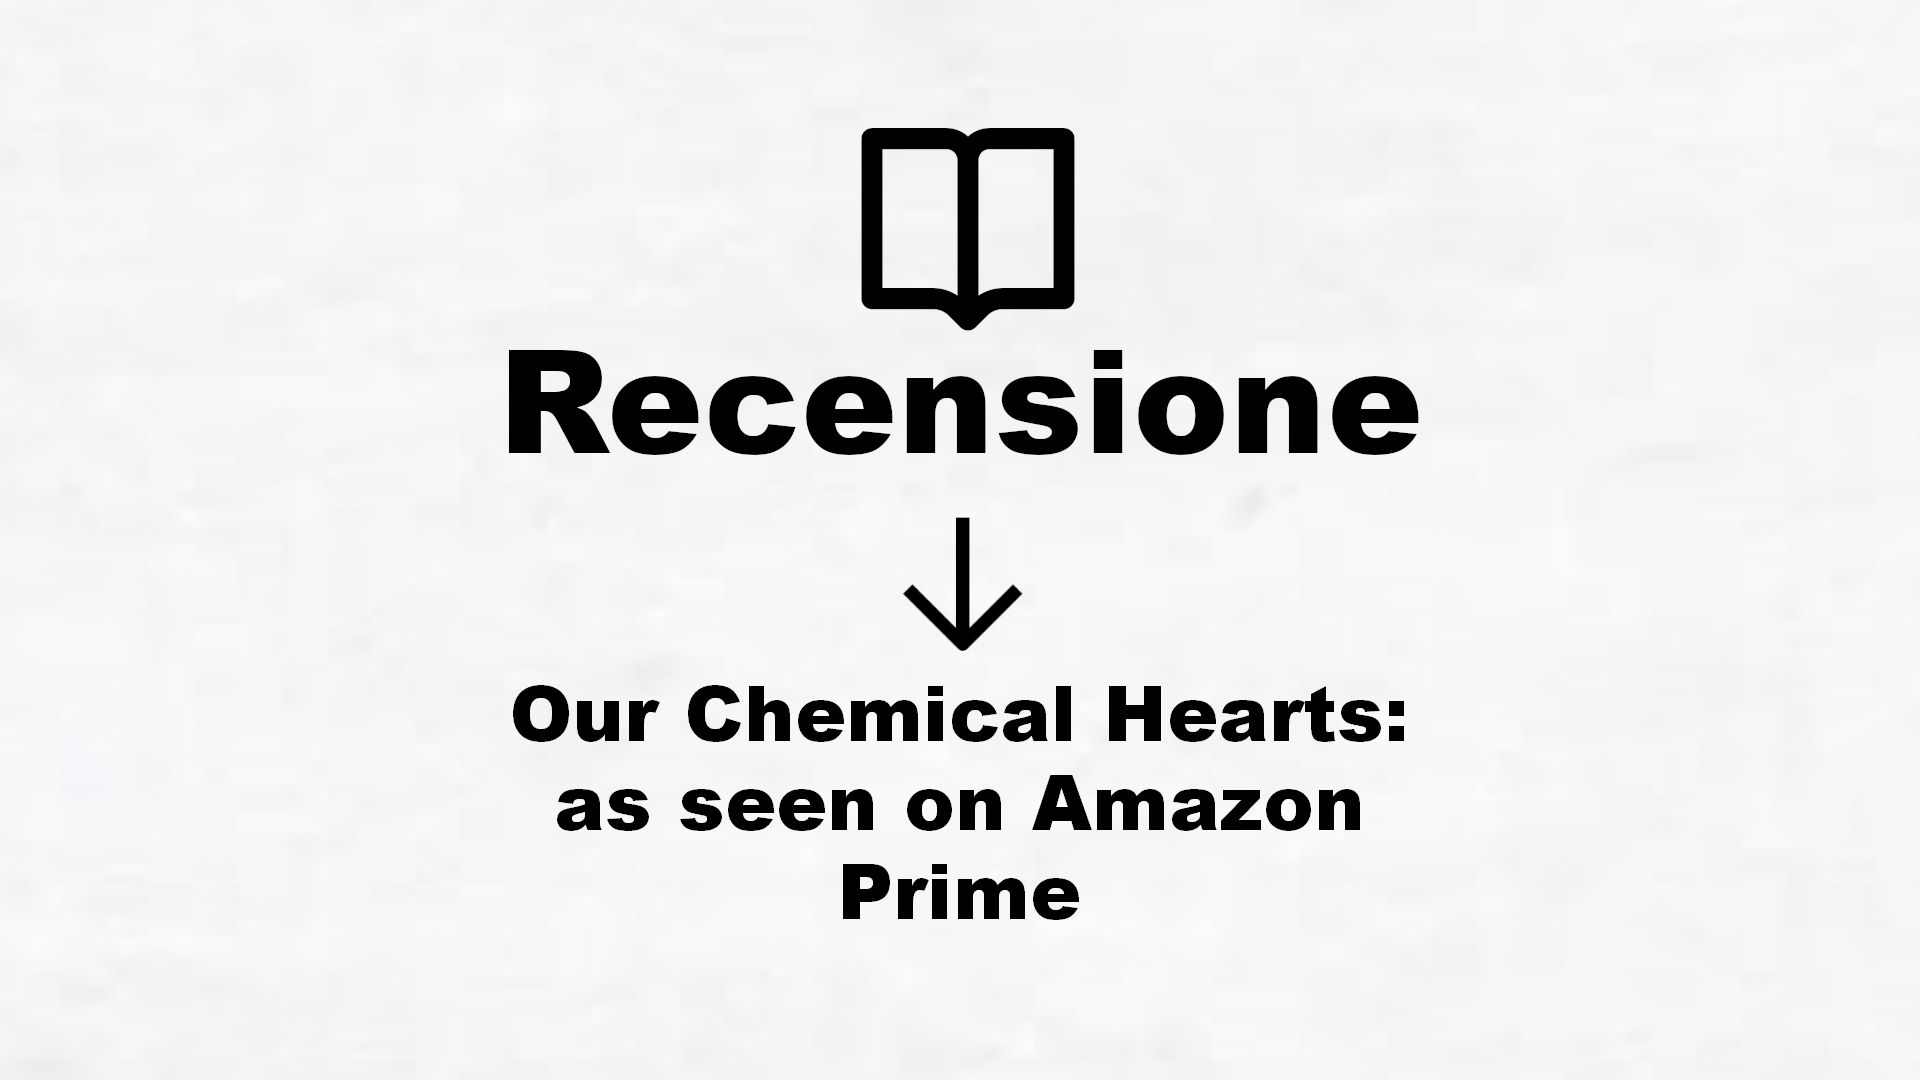 Our Chemical Hearts: as seen on Amazon Prime – Recensione Libro